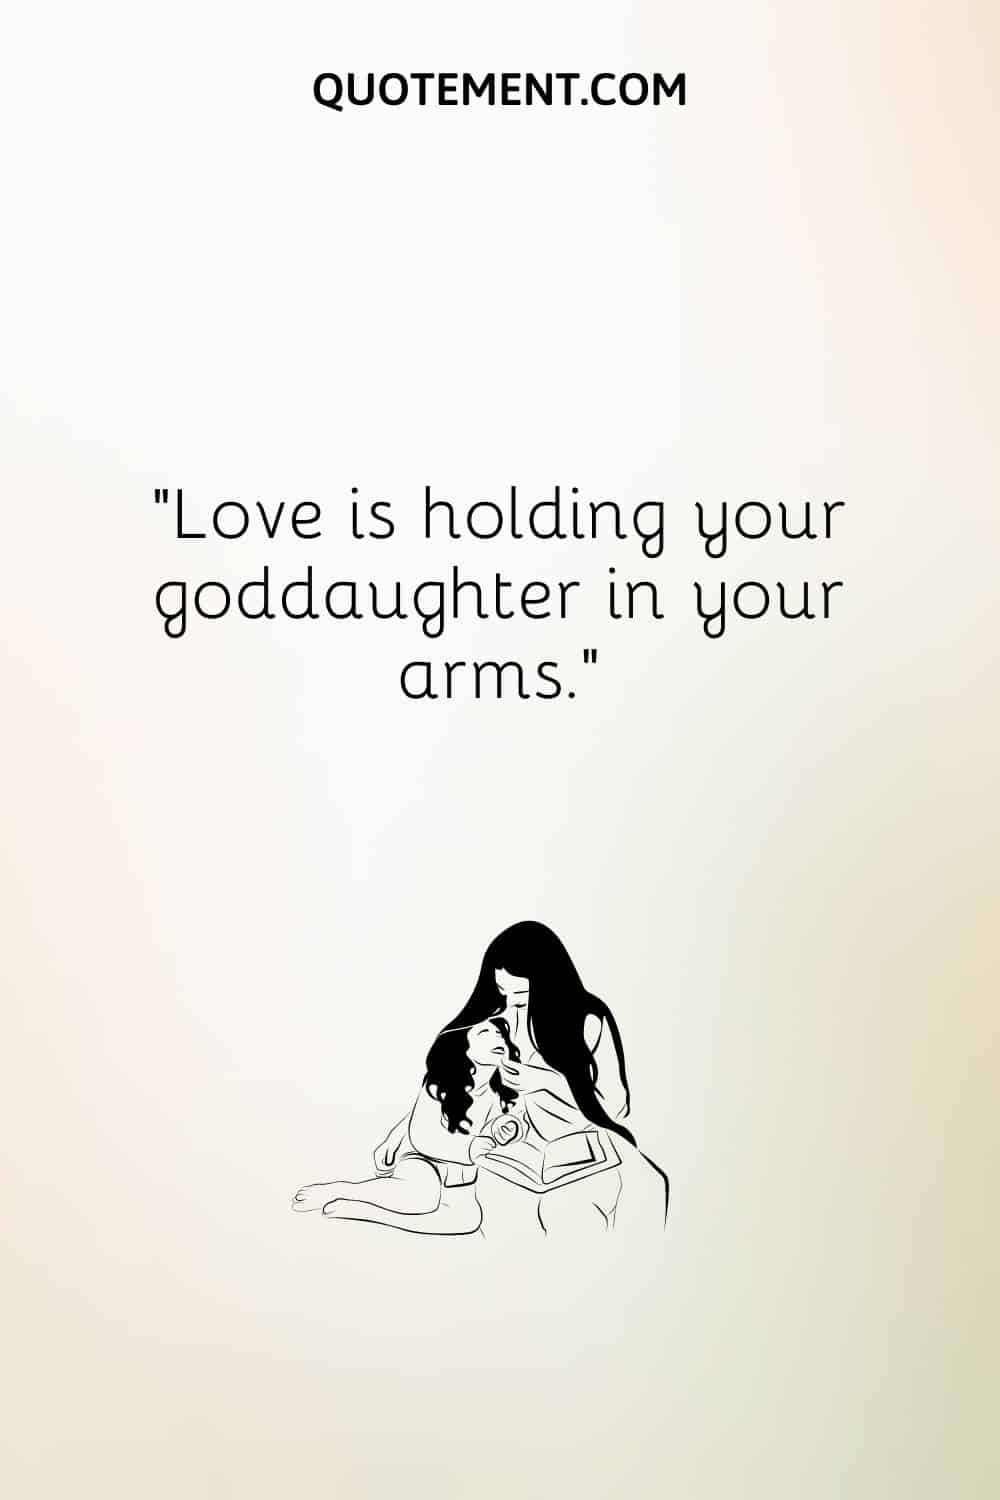 “Love is holding your goddaughter in your arms.”